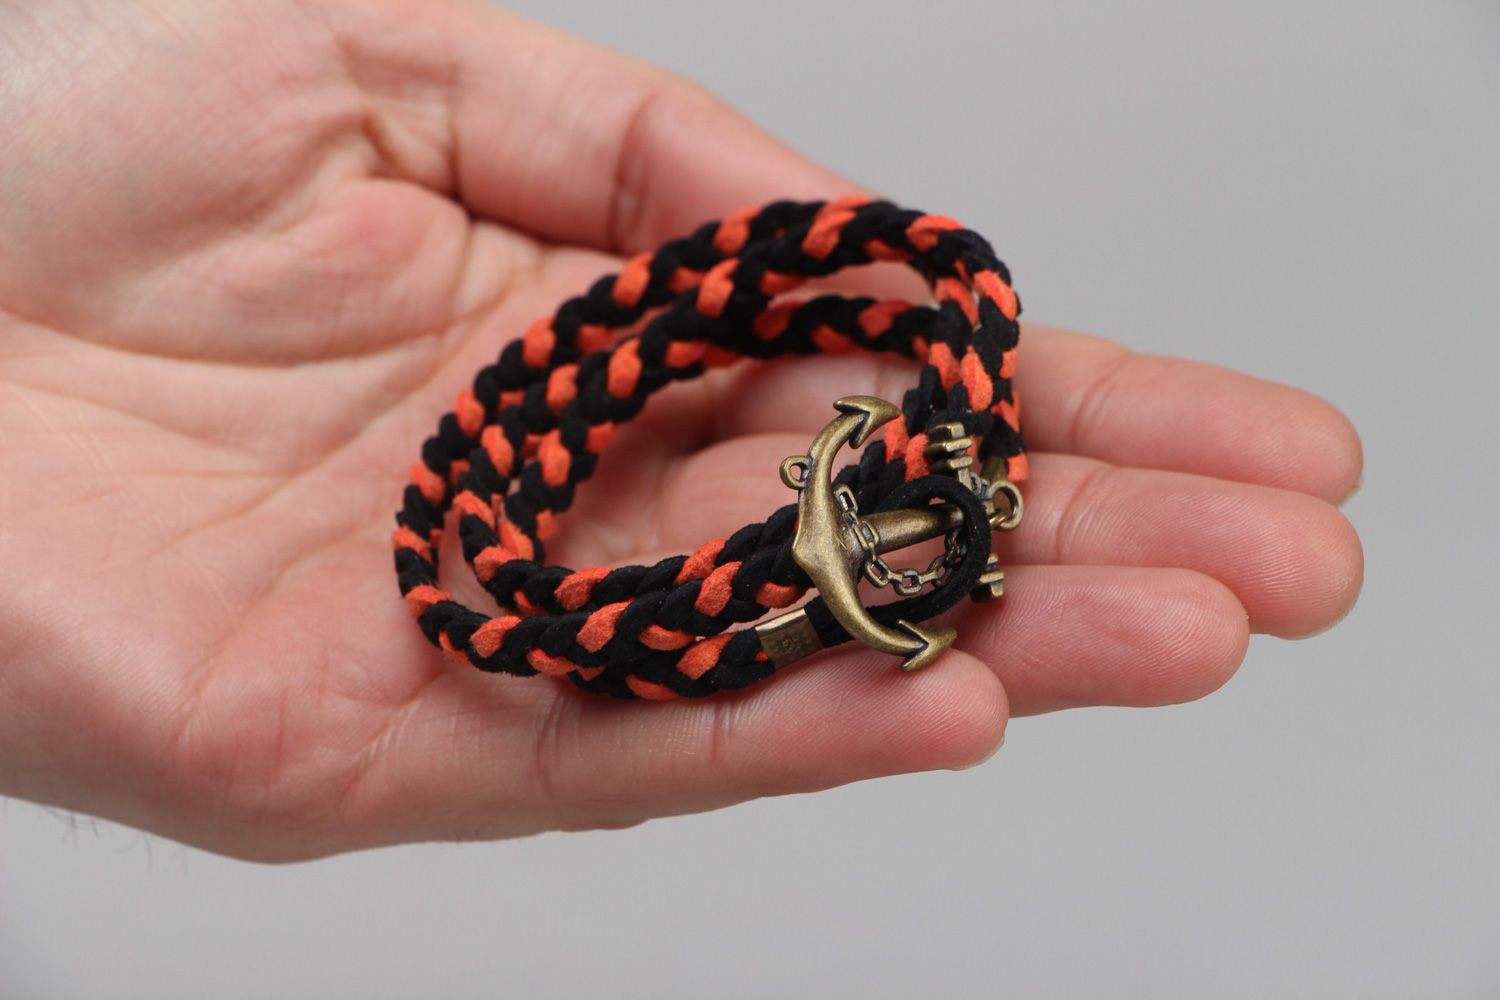 Handmade marine bracelet woven of faux suede cord of black and orange colors photo 3